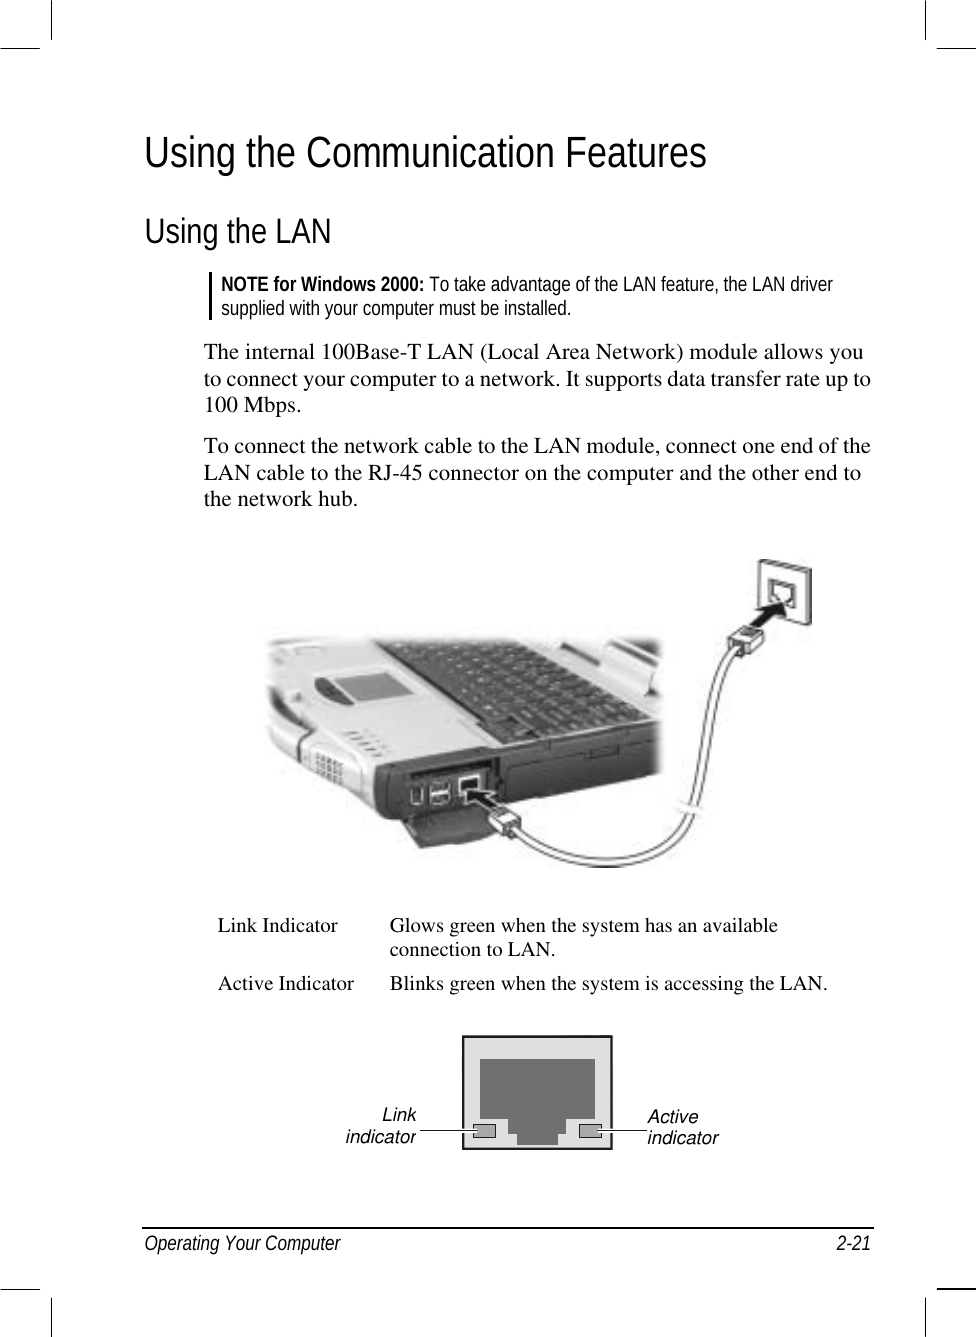  Operating Your Computer  2-21 Using the Communication Features Using the LAN NOTE for Windows 2000: To take advantage of the LAN feature, the LAN driver supplied with your computer must be installed.  The internal 100Base-T LAN (Local Area Network) module allows you to connect your computer to a network. It supports data transfer rate up to 100 Mbps. To connect the network cable to the LAN module, connect one end of the LAN cable to the RJ-45 connector on the computer and the other end to the network hub.  Link Indicator  Glows green when the system has an available connection to LAN. Active Indicator  Blinks green when the system is accessing the LAN.  Active indicator Linkindicator